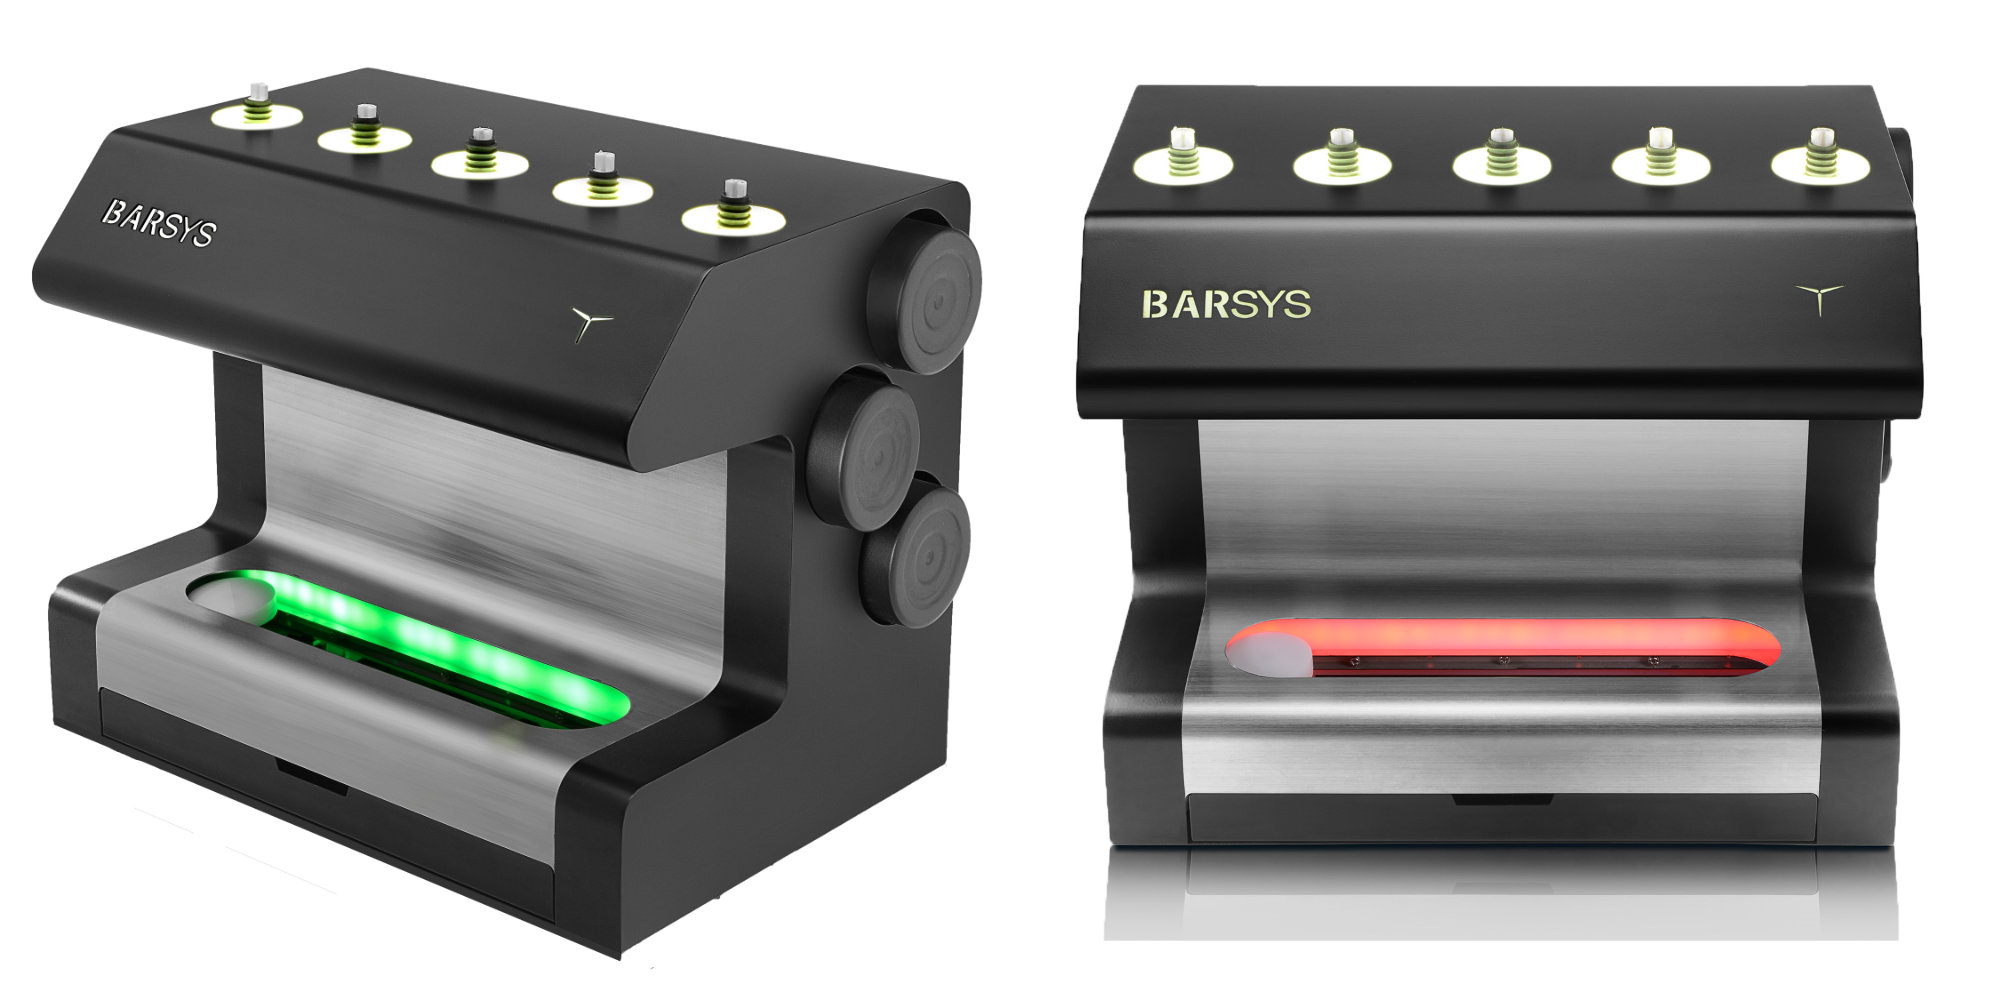 Barsys is the 'world's first' automated cocktail maker and it